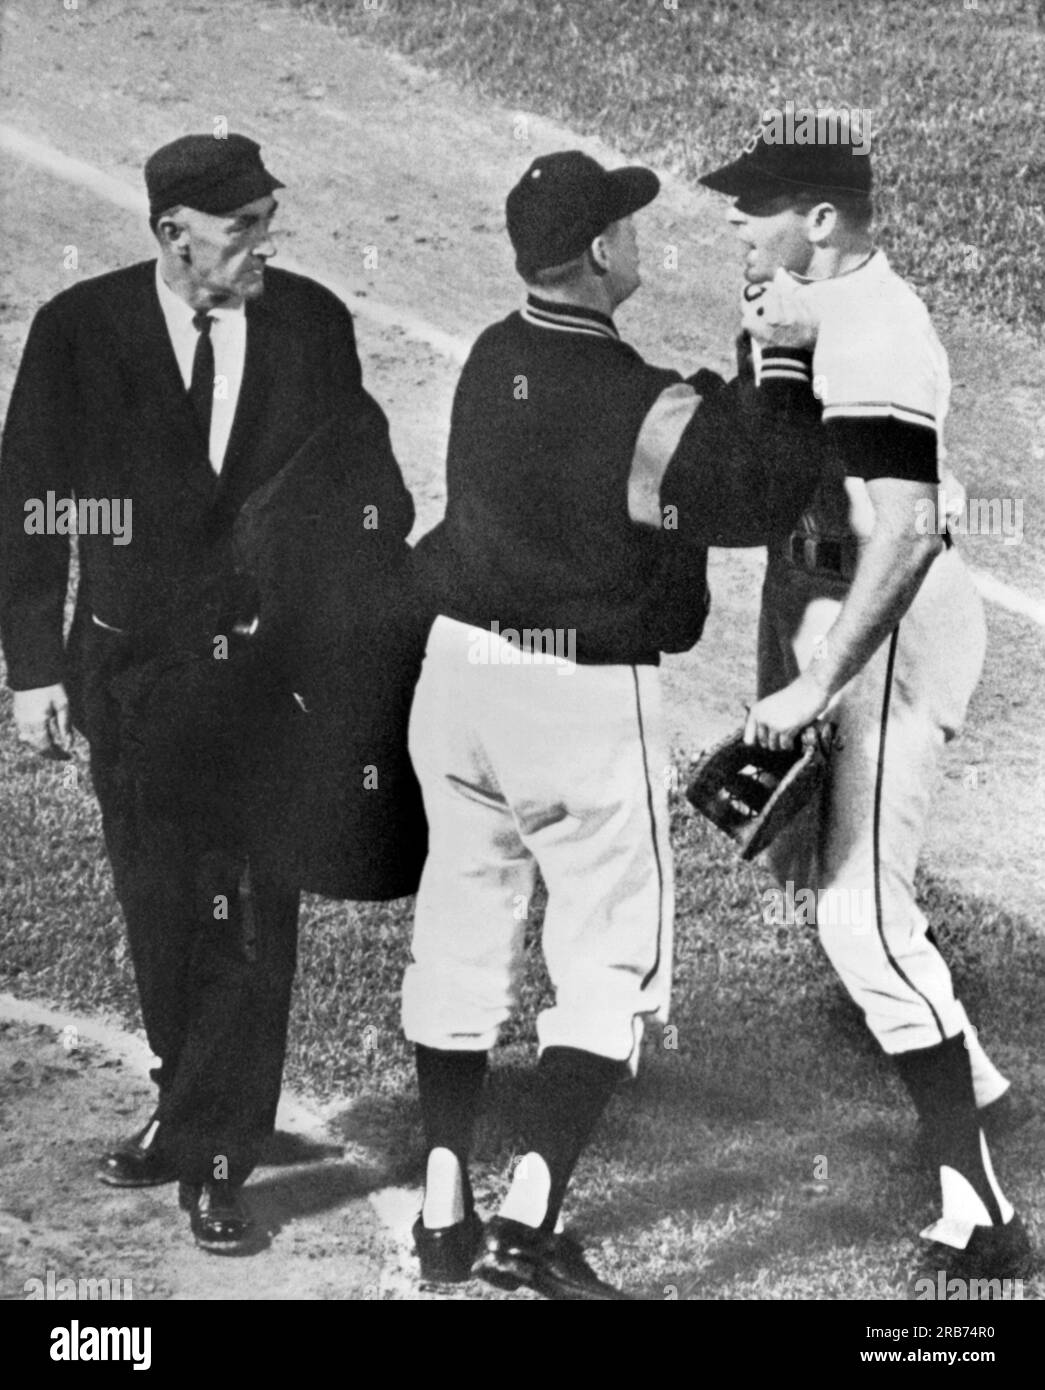 Baltimore, Maryland:  May, 1963 Baltimore first baseman JIm Gentile gets collared by his manager Billy Hitchcock as he charged towards umpire Ed Runge after being ejected from the game. Stock Photo